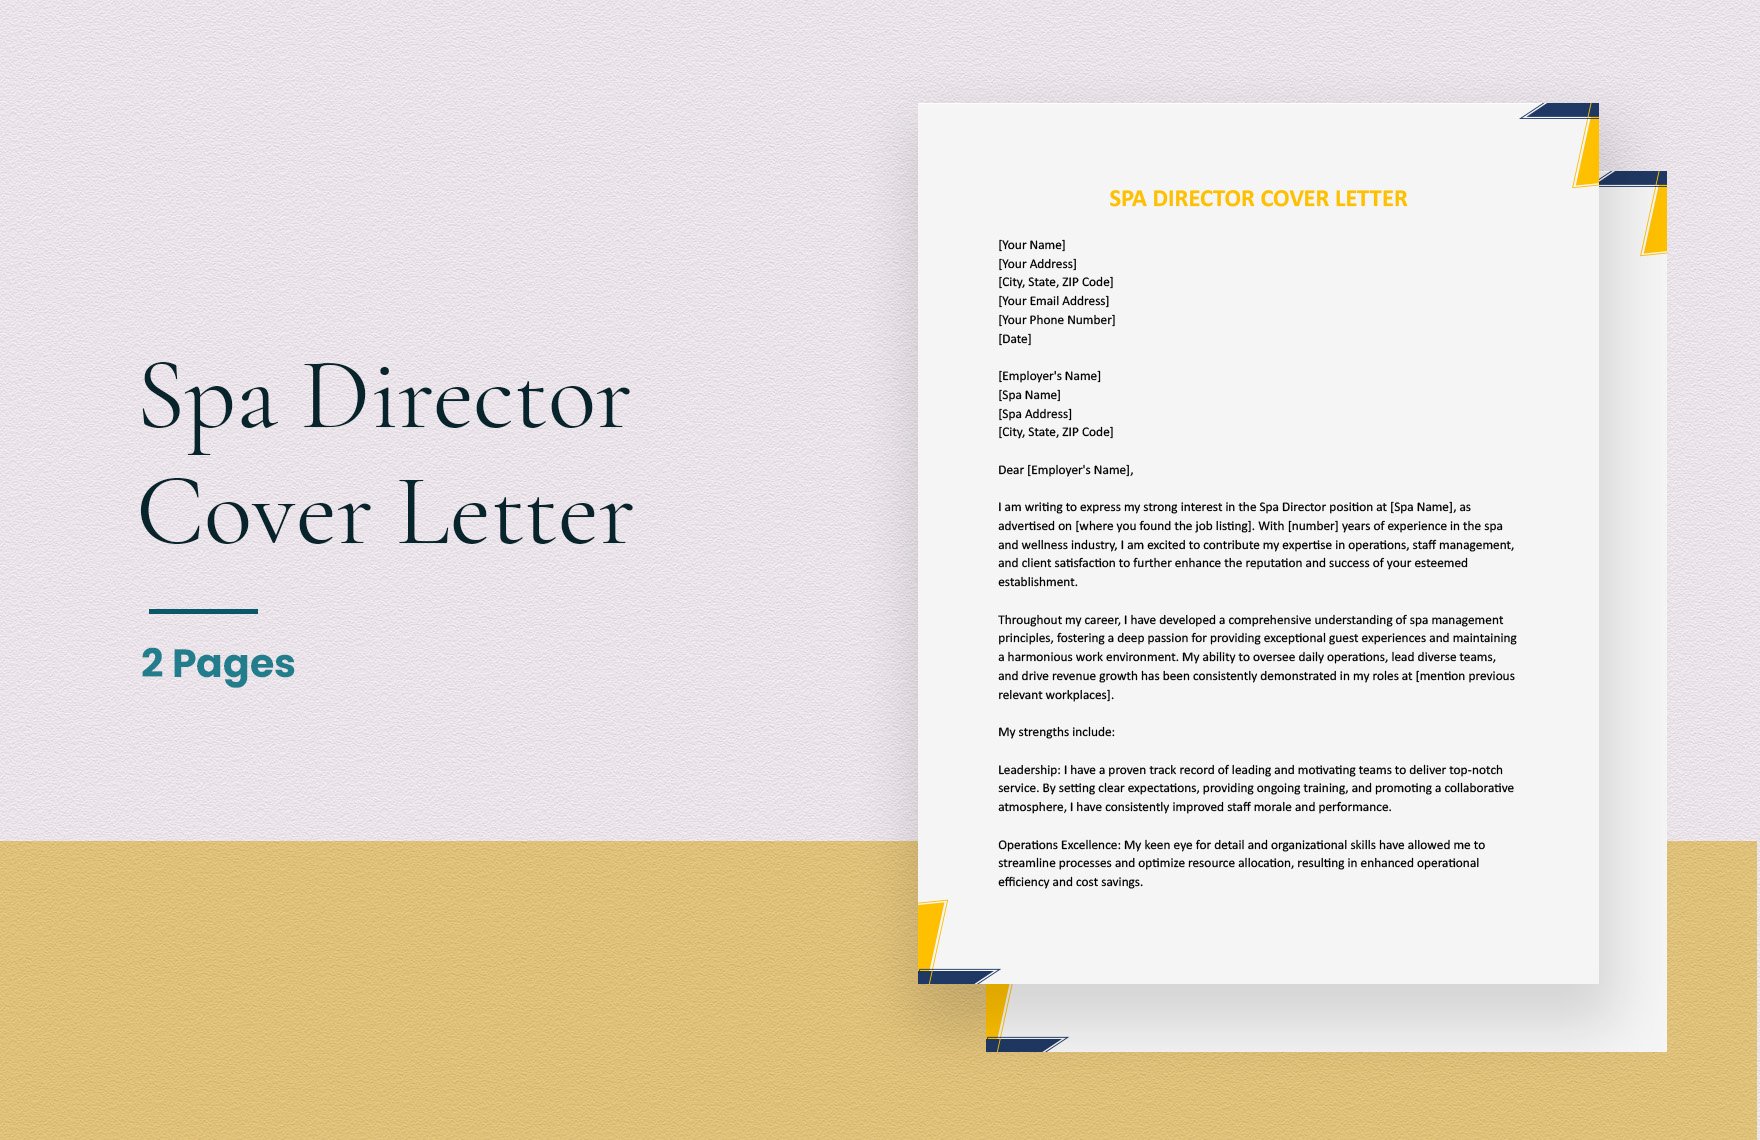 Spa Director Cover Letter